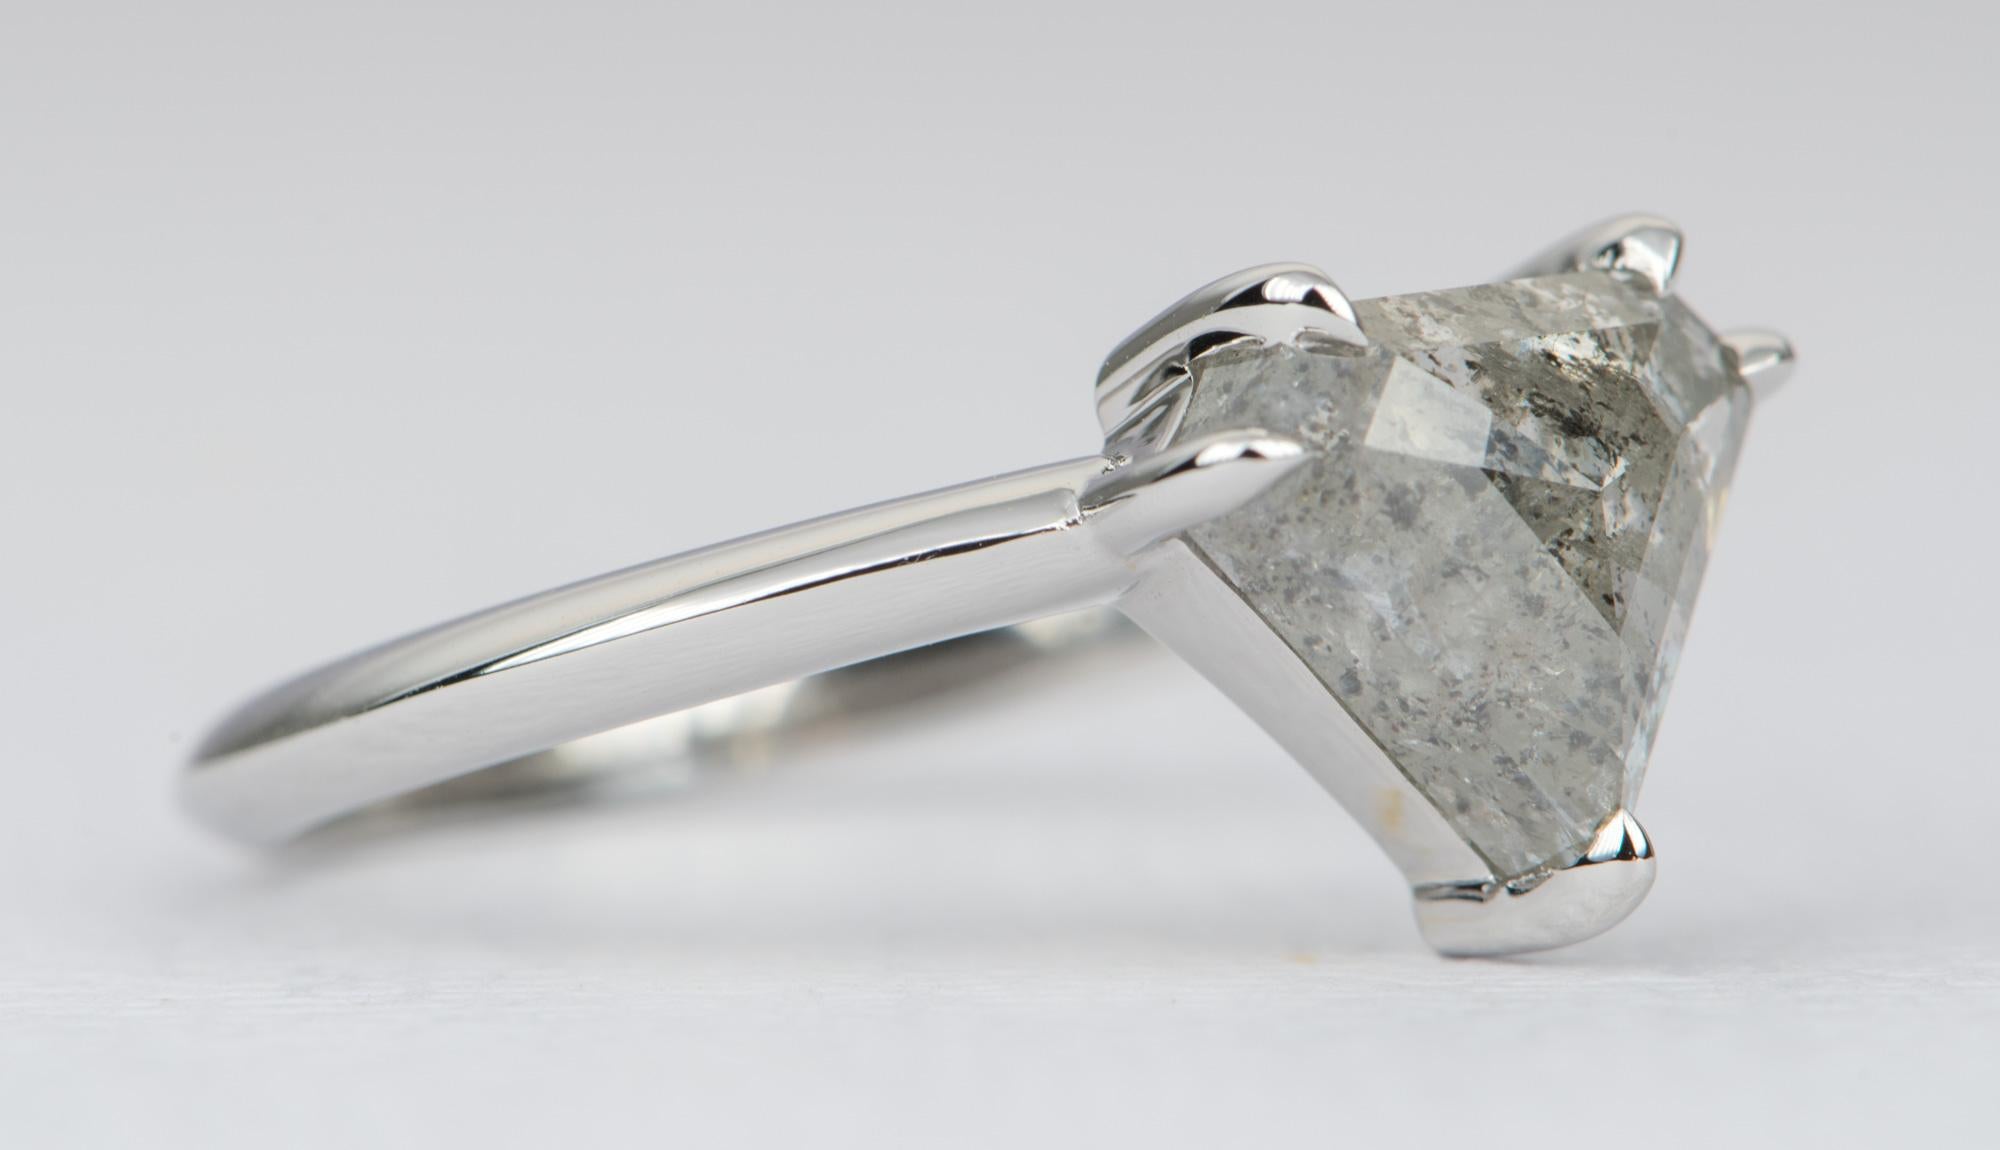 ♥  Solid 14K white gold ring set with a shield-shaped salt and pepper diamond 
 ♥  The knife edge band gives this ring a modern look
 ♥  The overall setting measures 10.5mm in width, 9.1mm in length, and sits 5.2mm tall from the finger
 
 ♥  US Size